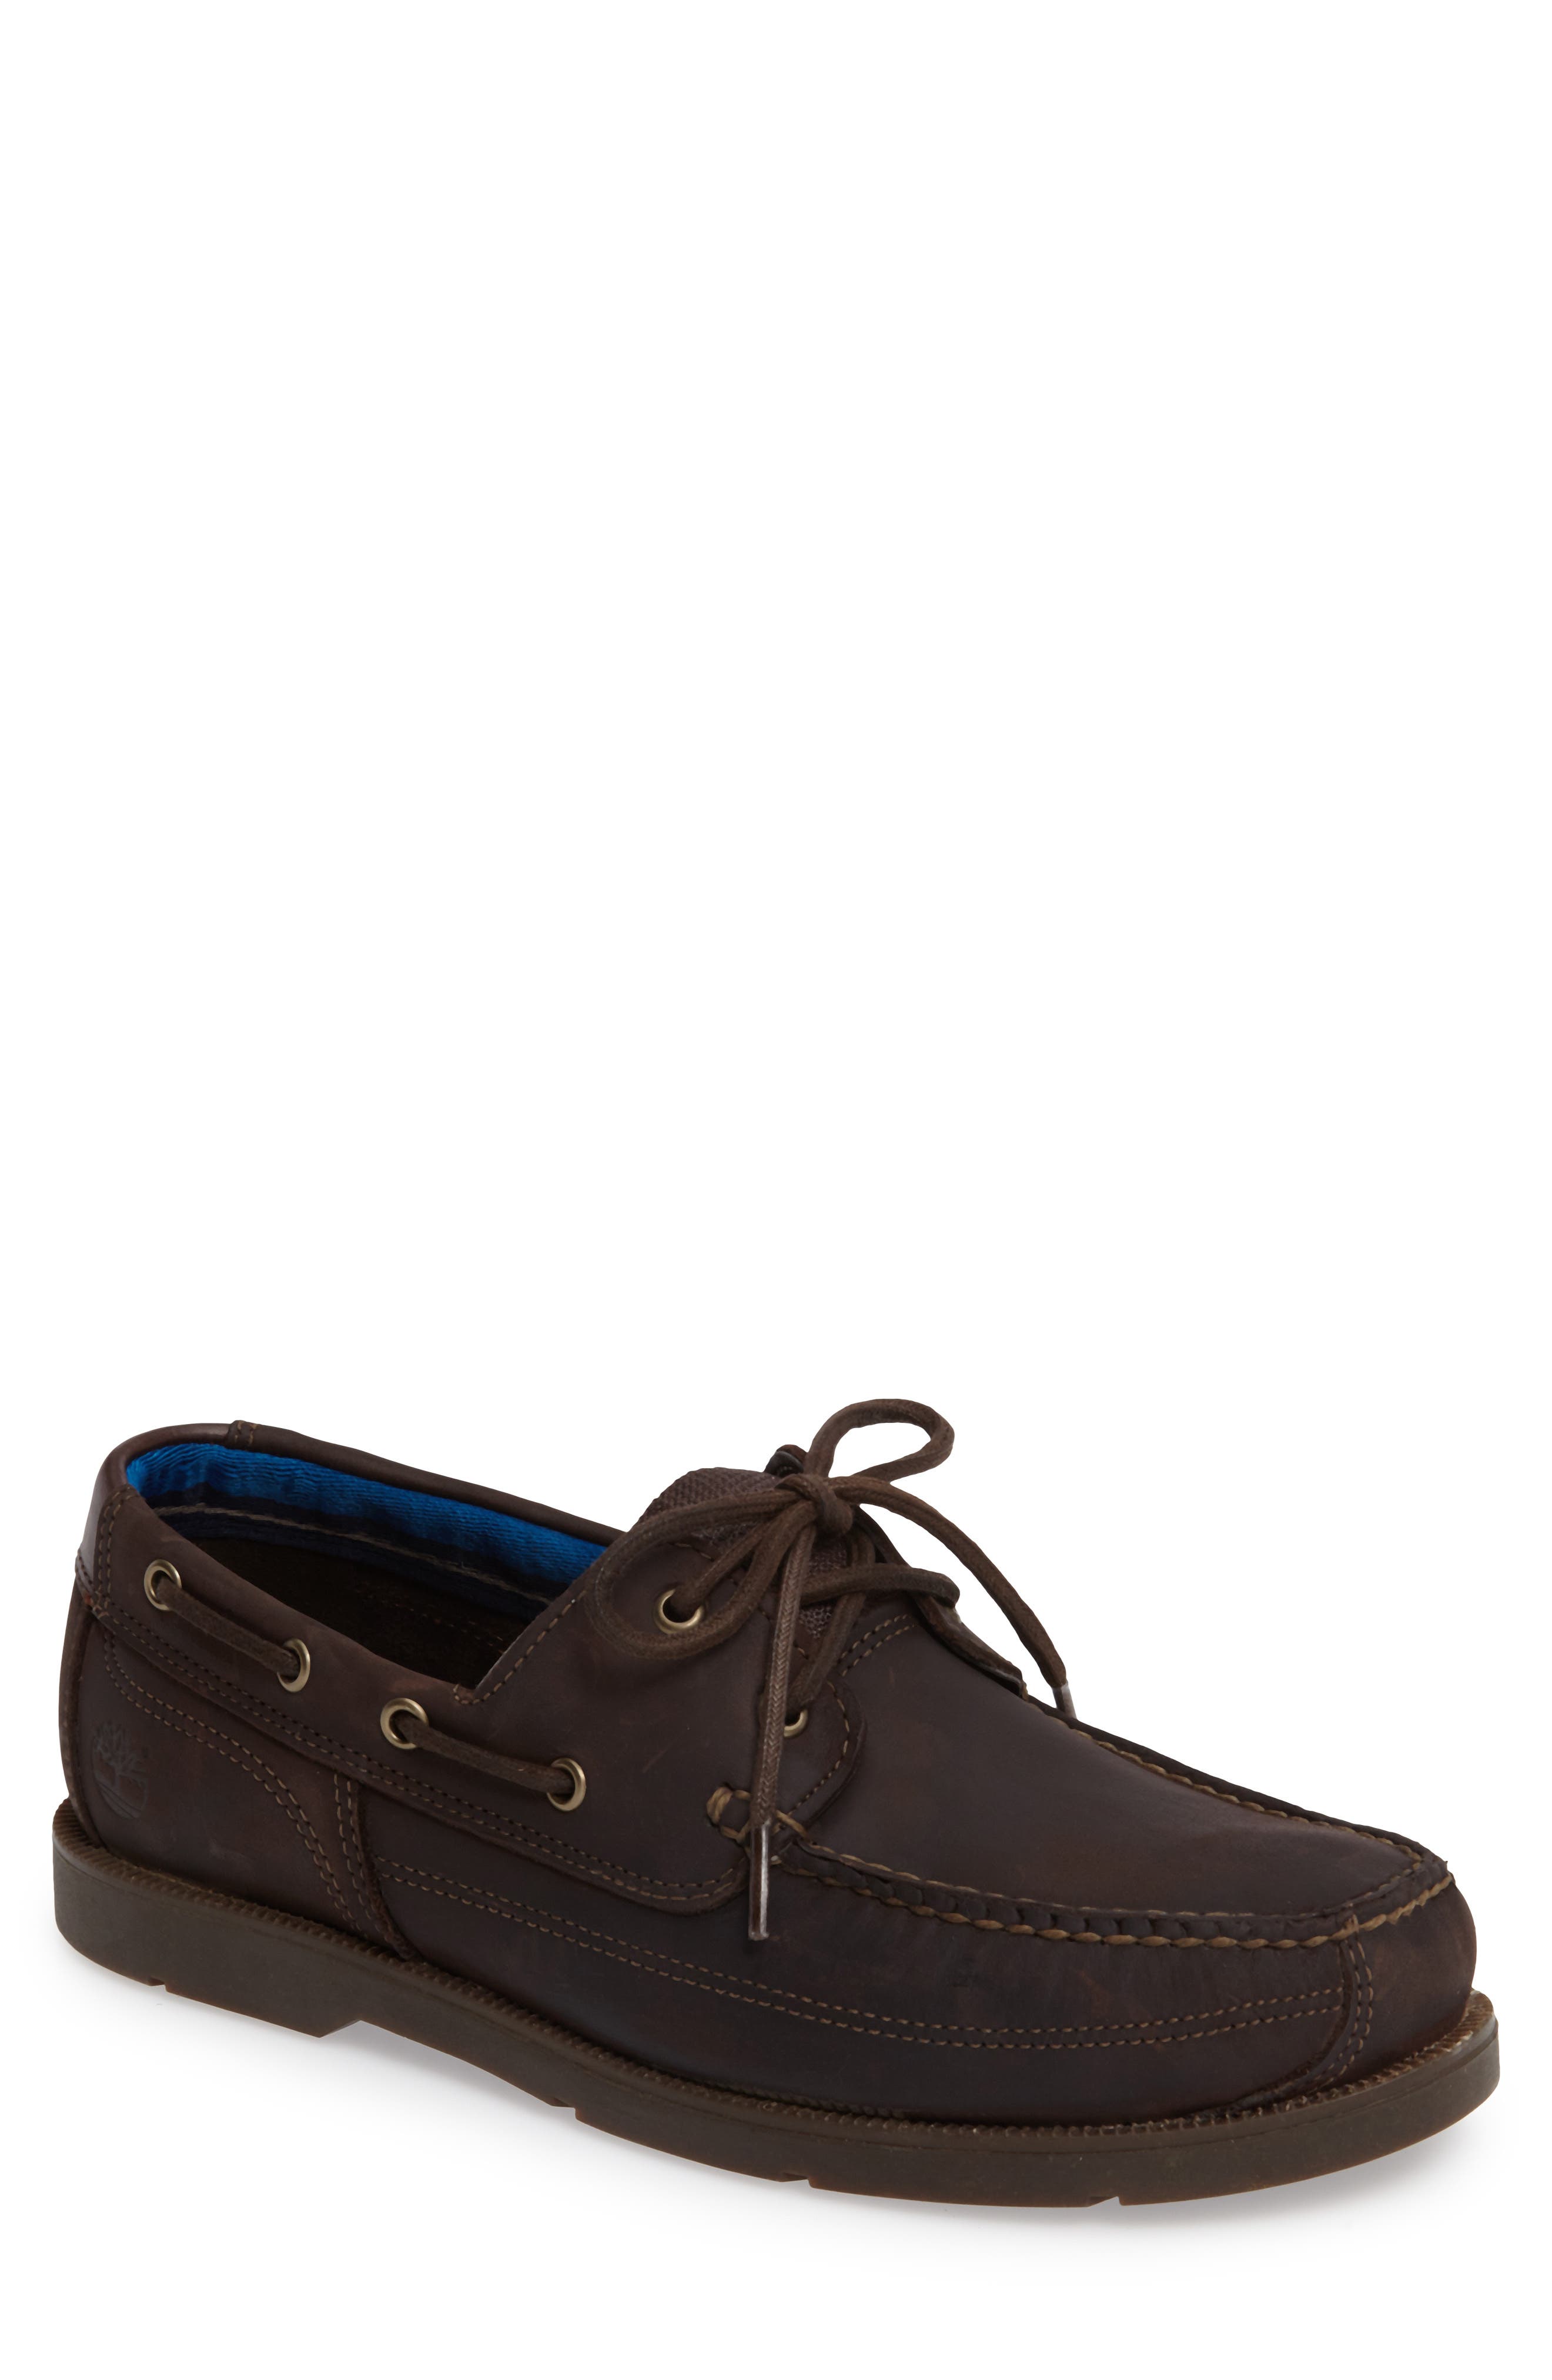 timberland piper cove leather boat shoe